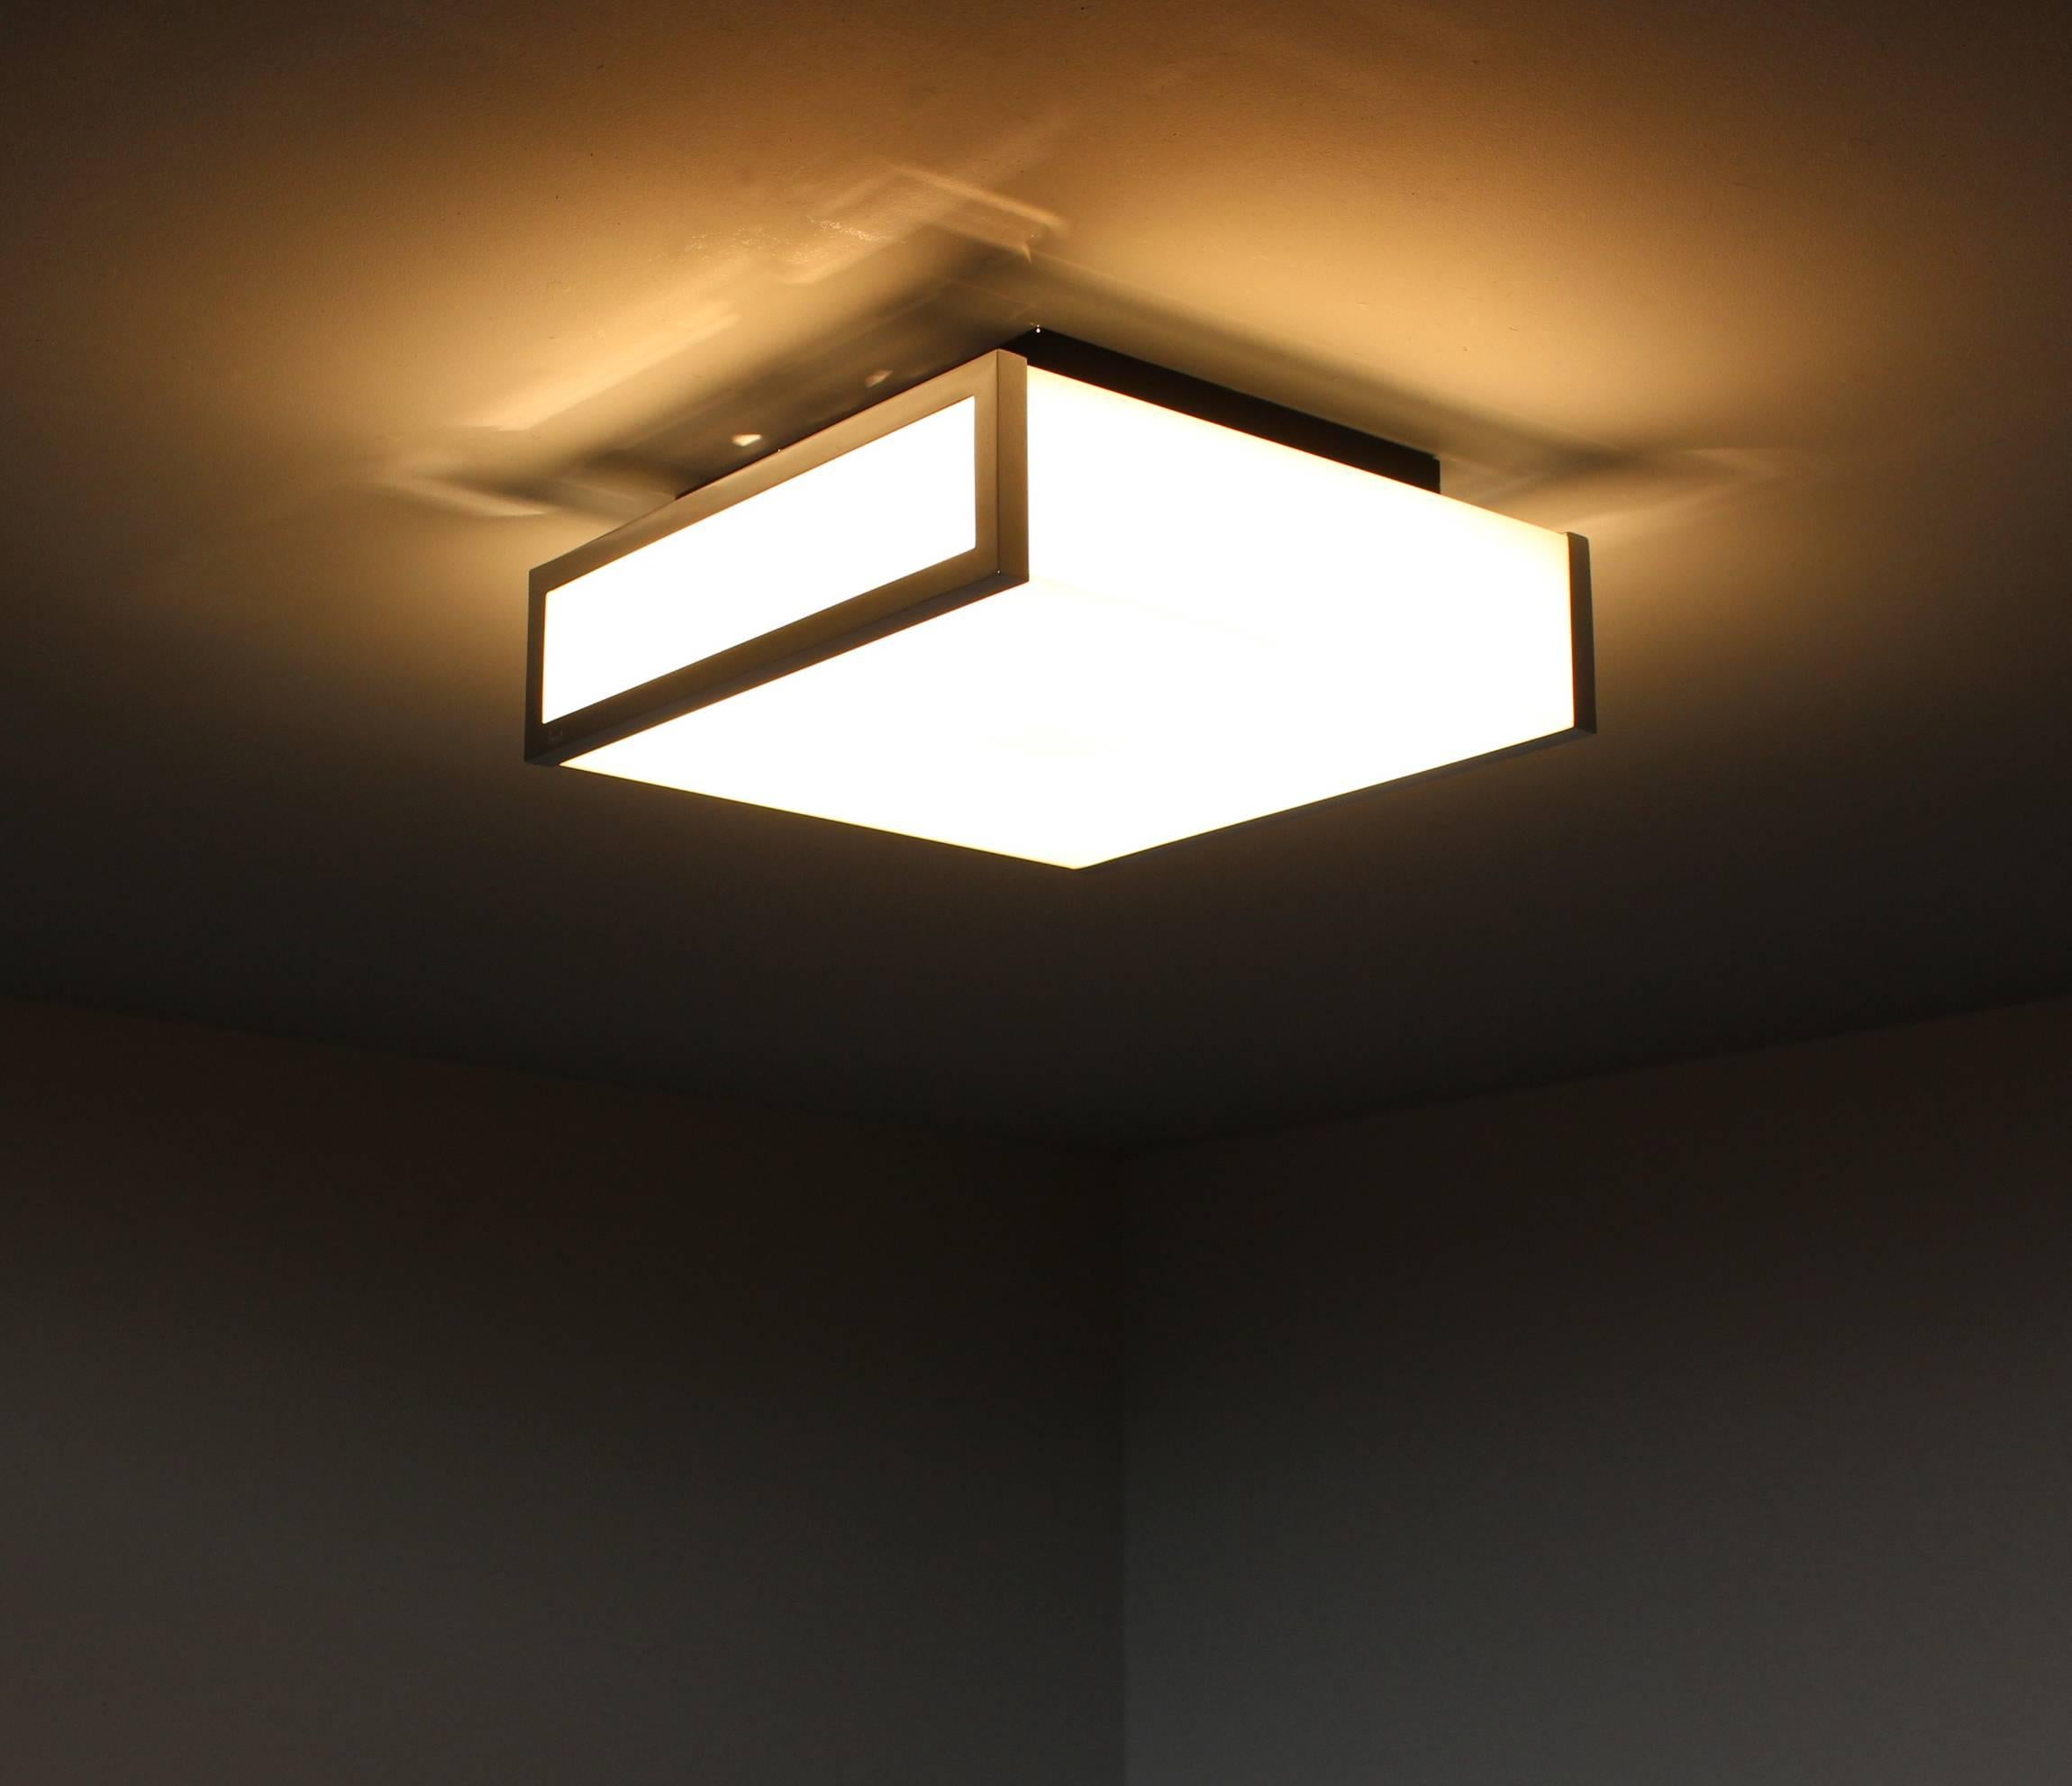 With a minimalist chromed frame that holds the white enameled glass shades which diffuse a nice bright light.
Can be used as a ceiling or wall light.